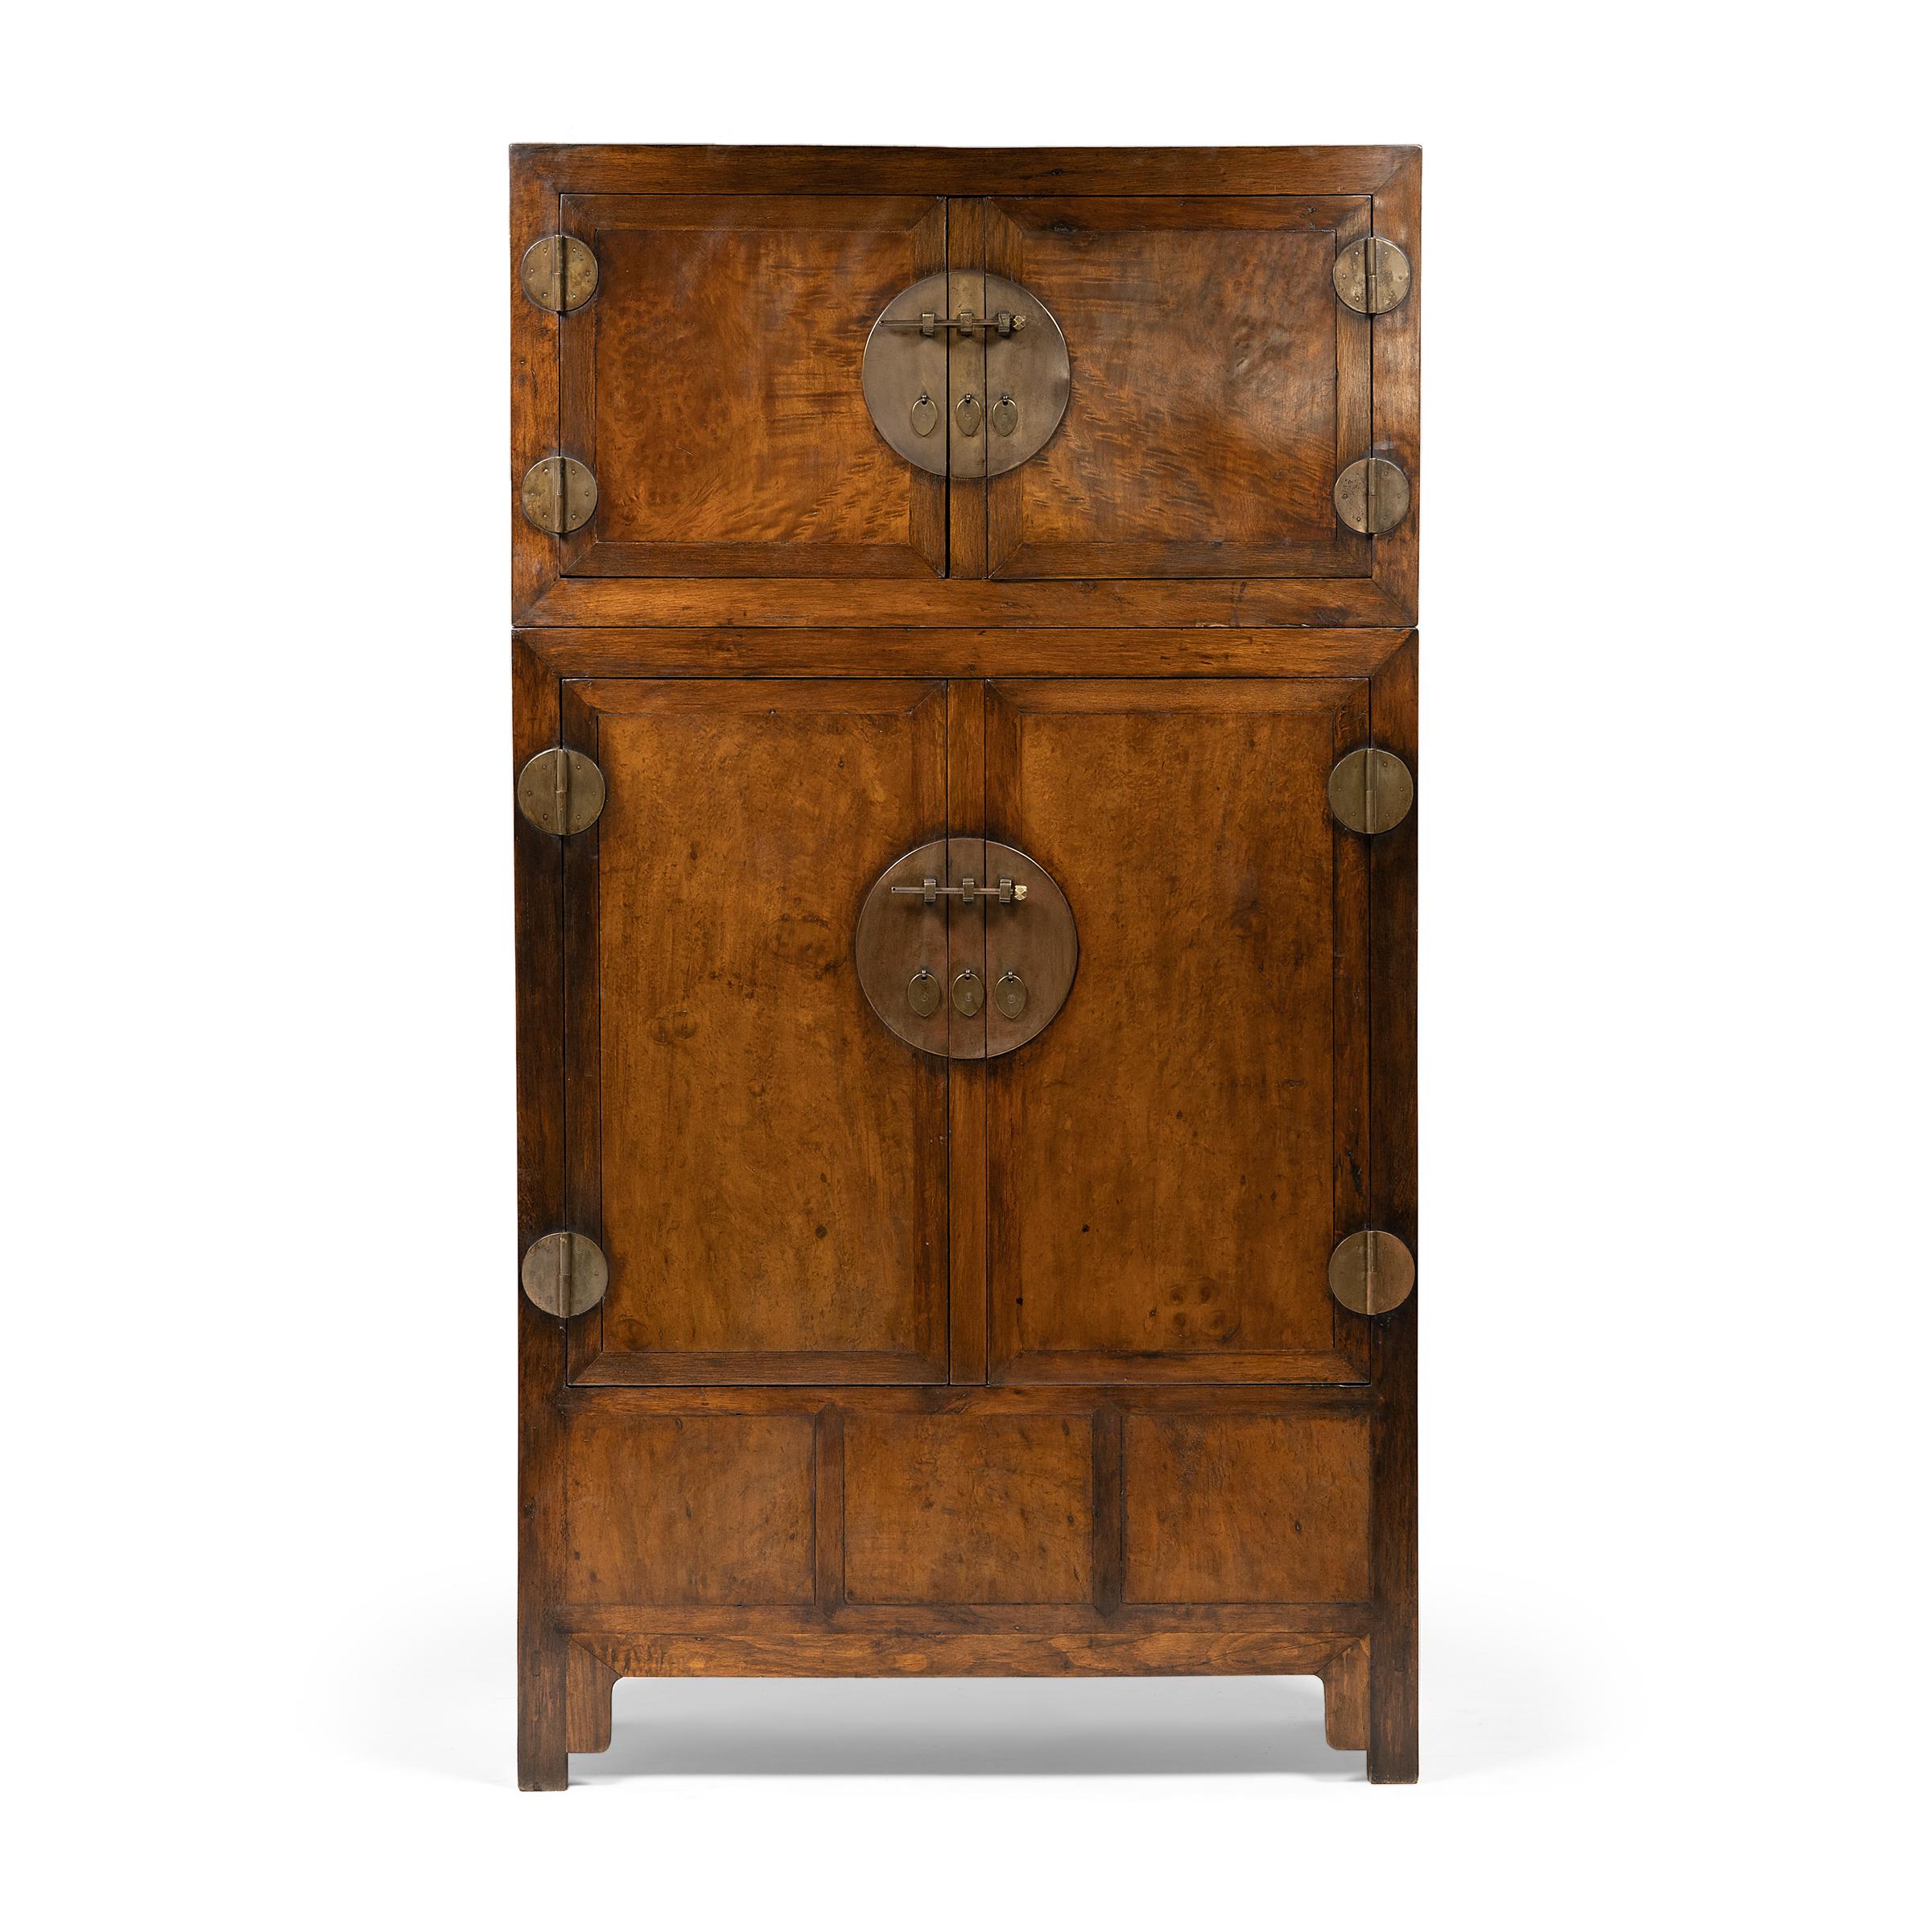 These refined Qing-dynasty compound cabinets command their surroundings with grand scale and fine materials. Constructed of camphor with traditional joinery, the tall cabinets are comprised of two separate, stacked storage compartments. The upper